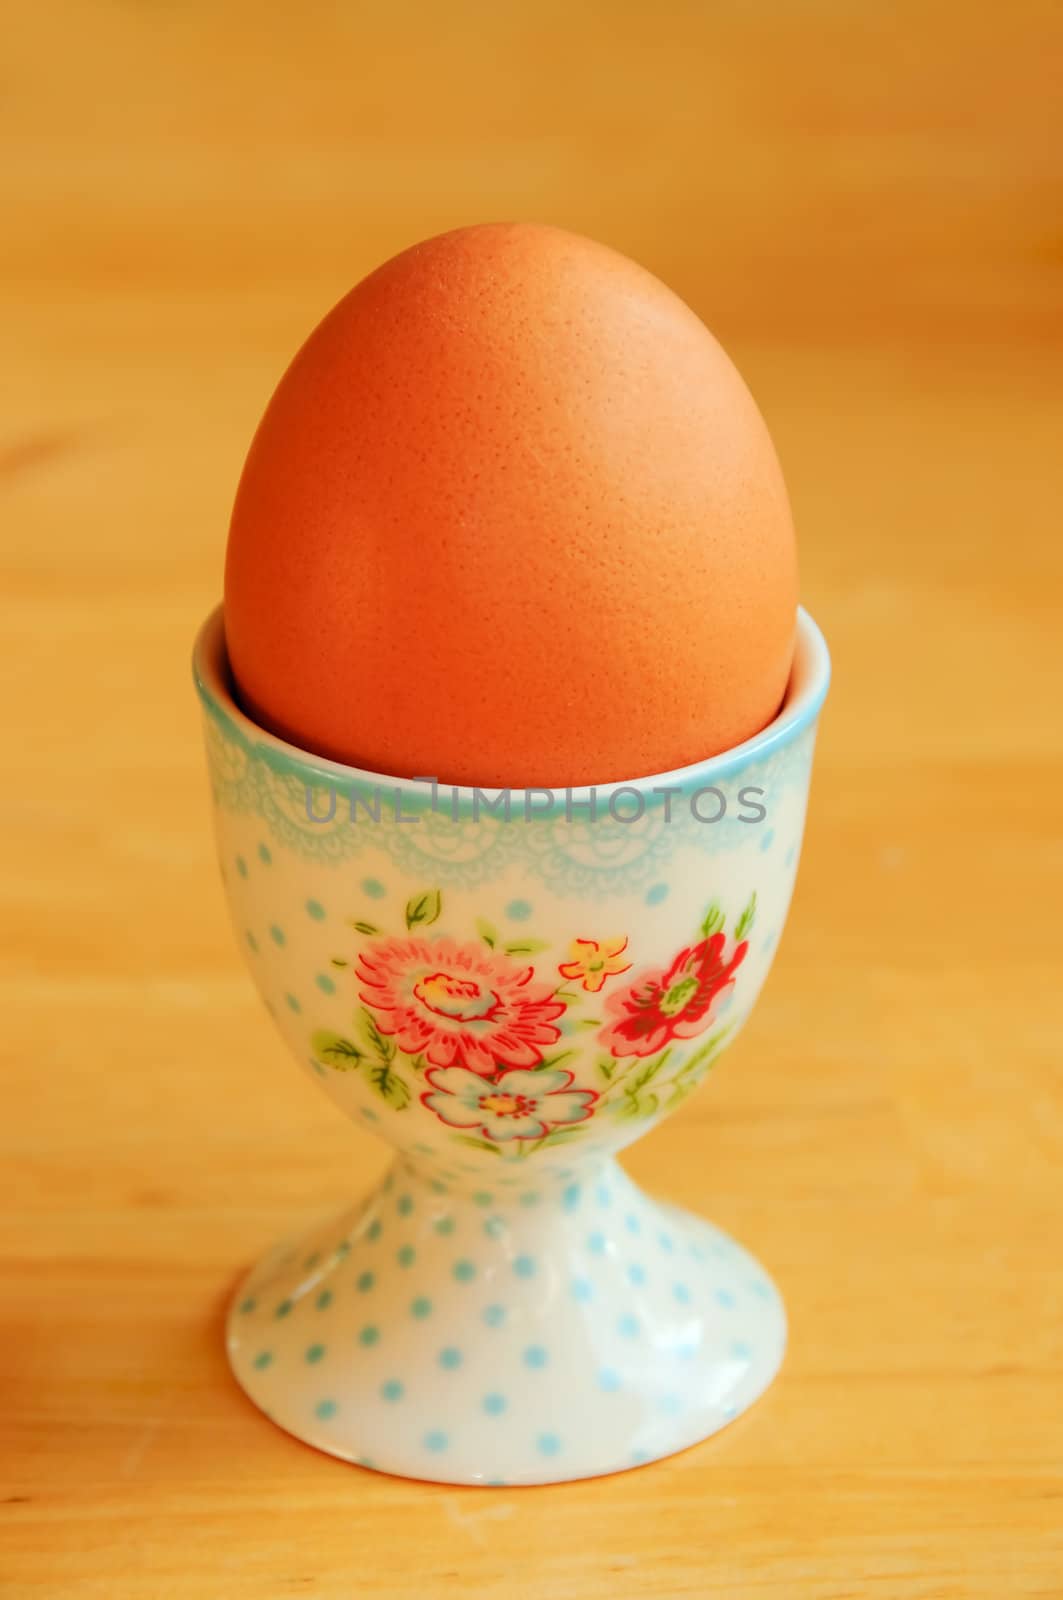 A single egg in egg cup on a kitchen table